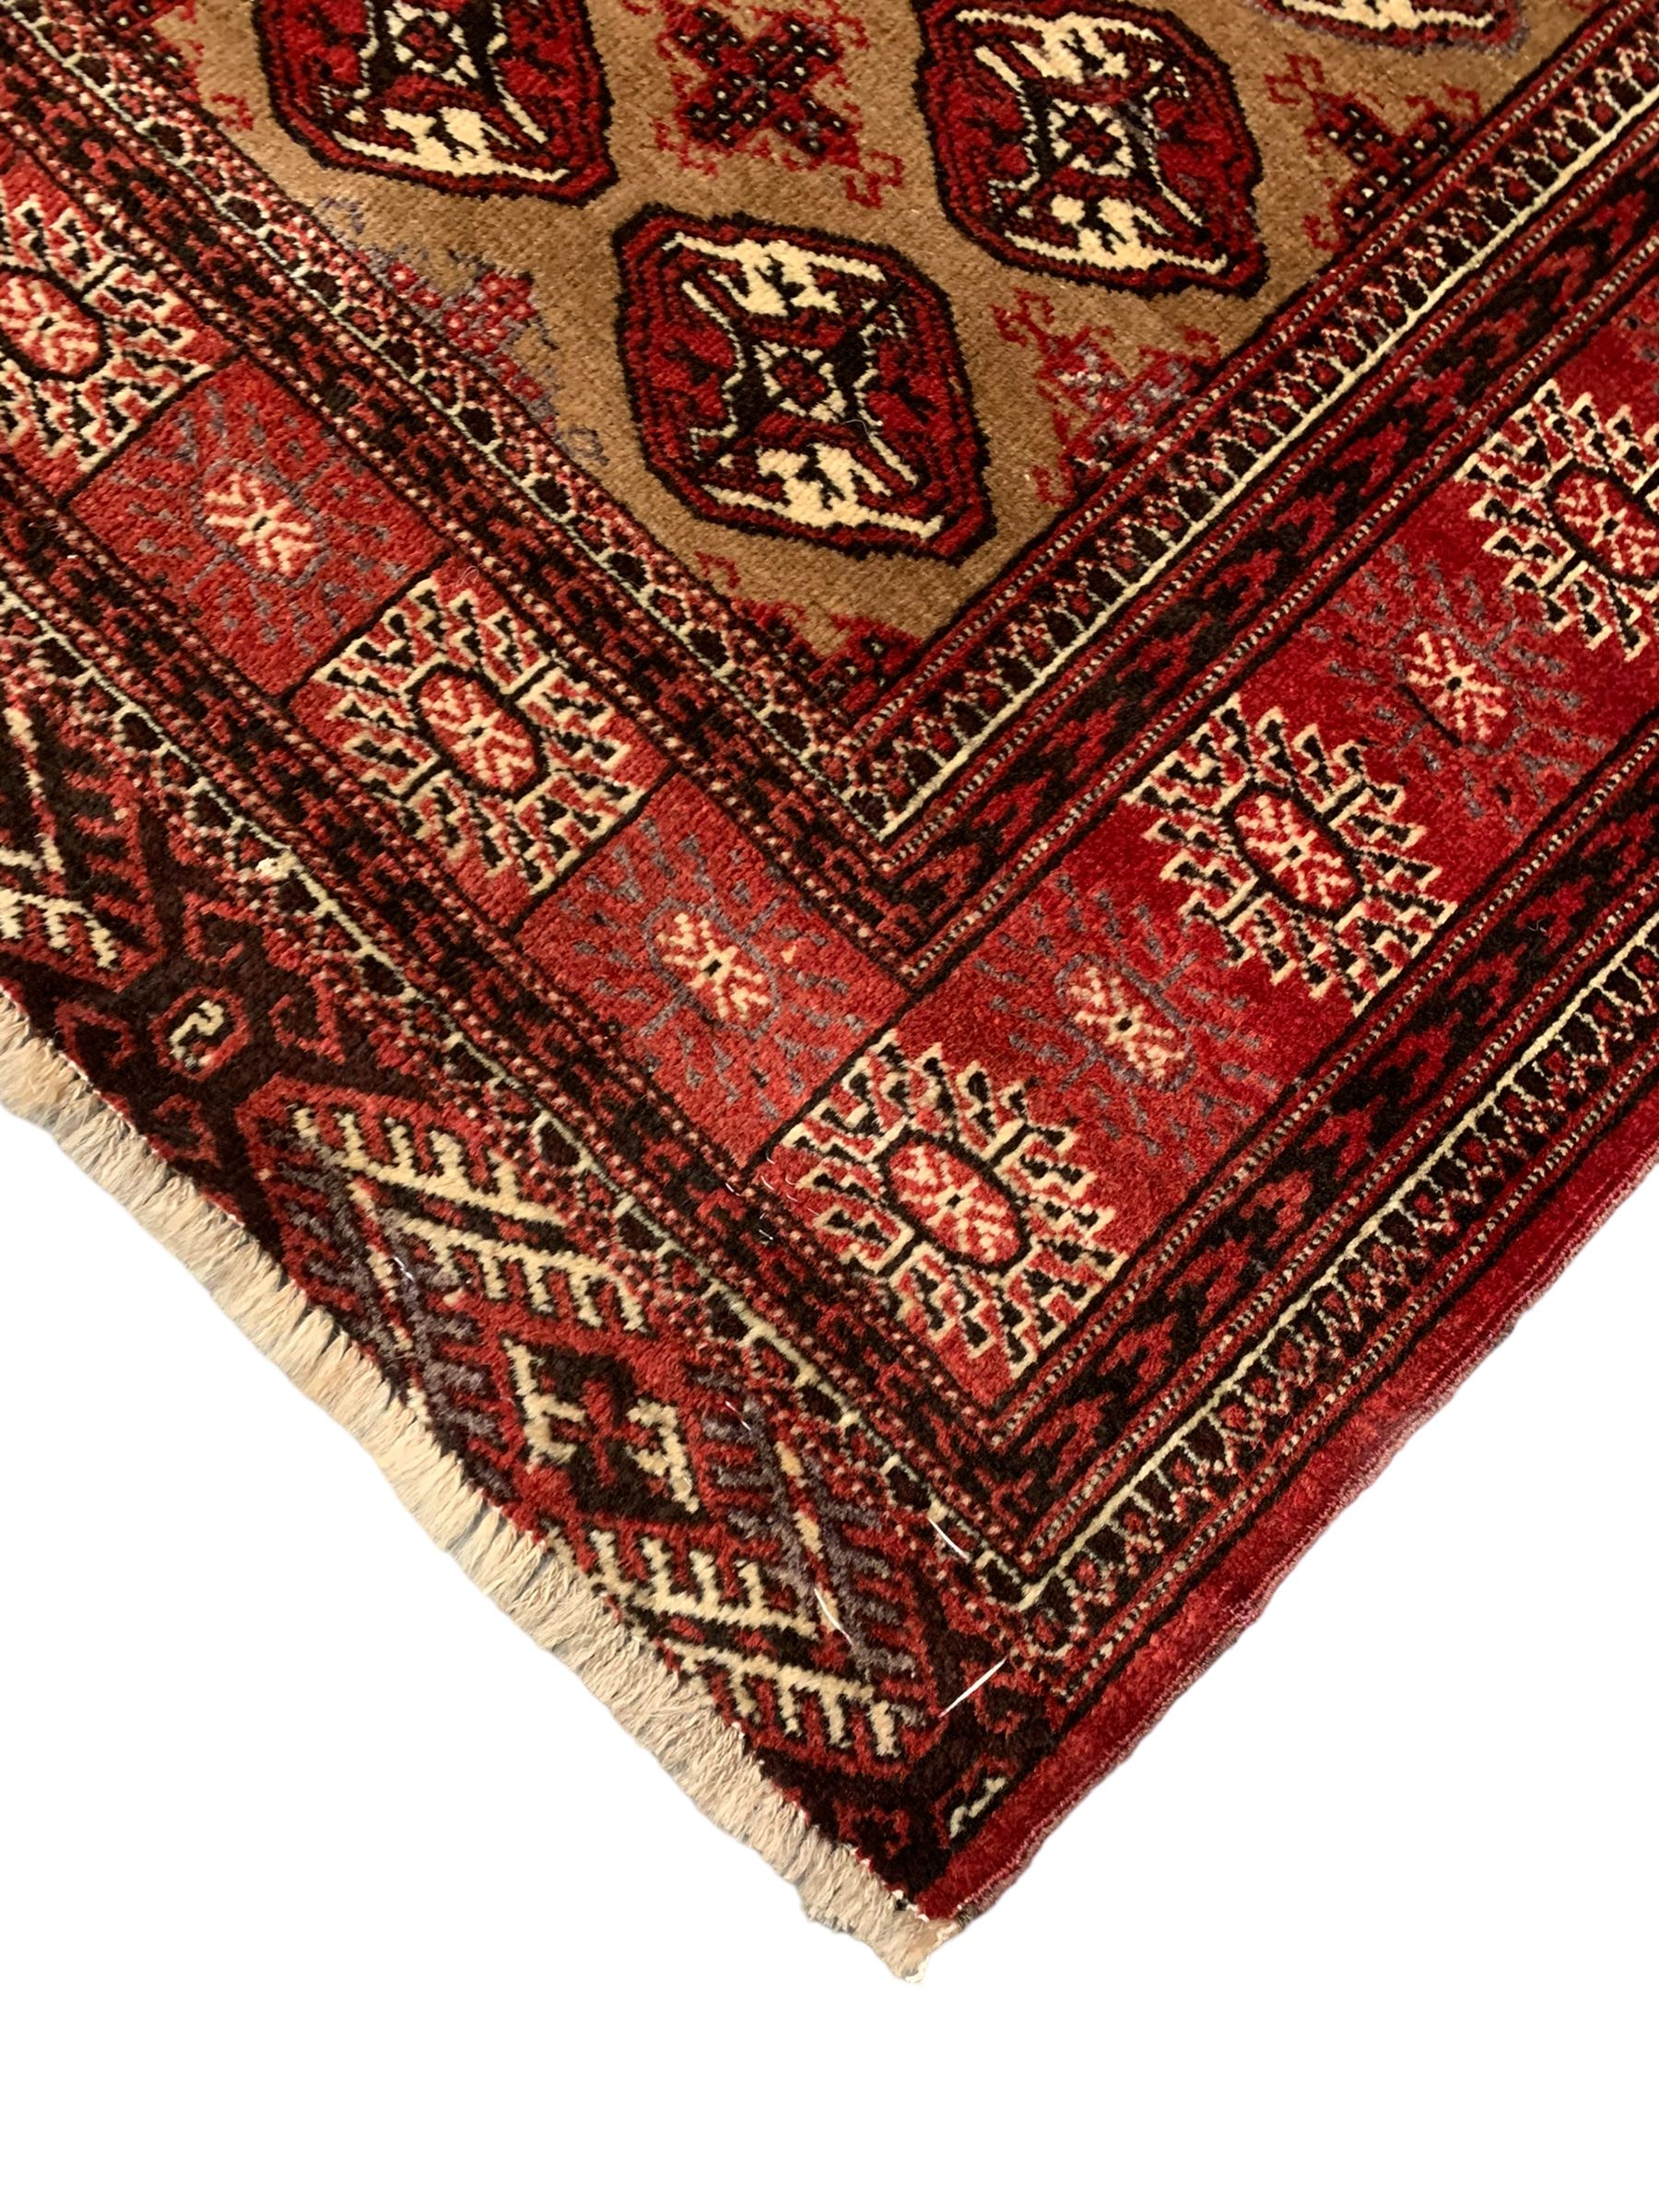 Persian Bokhara red ground rug - Image 2 of 6